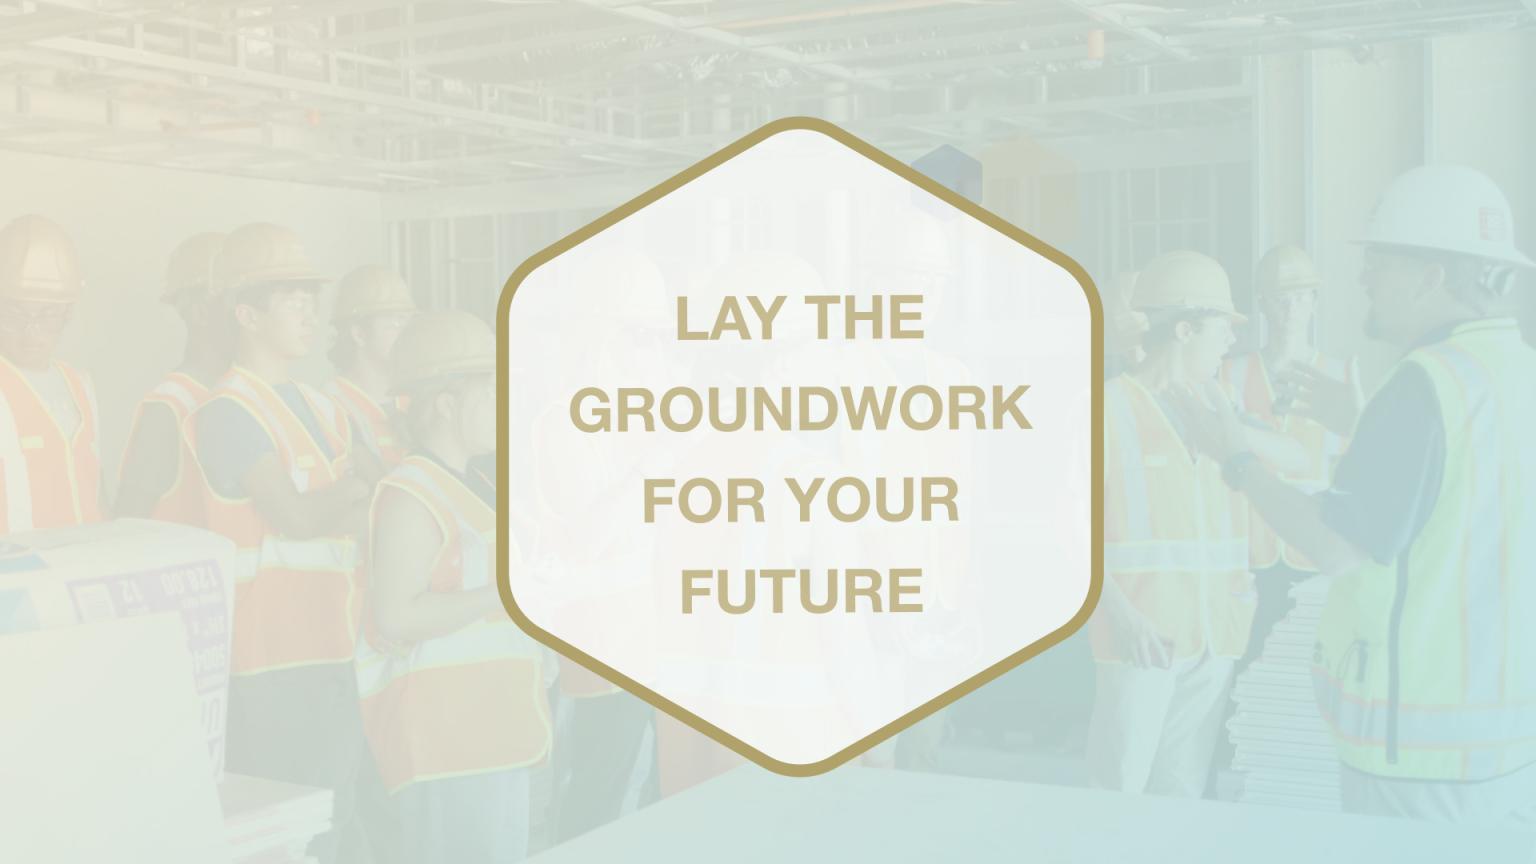 Graphic that says "Lay the Groundwork for Your Future"